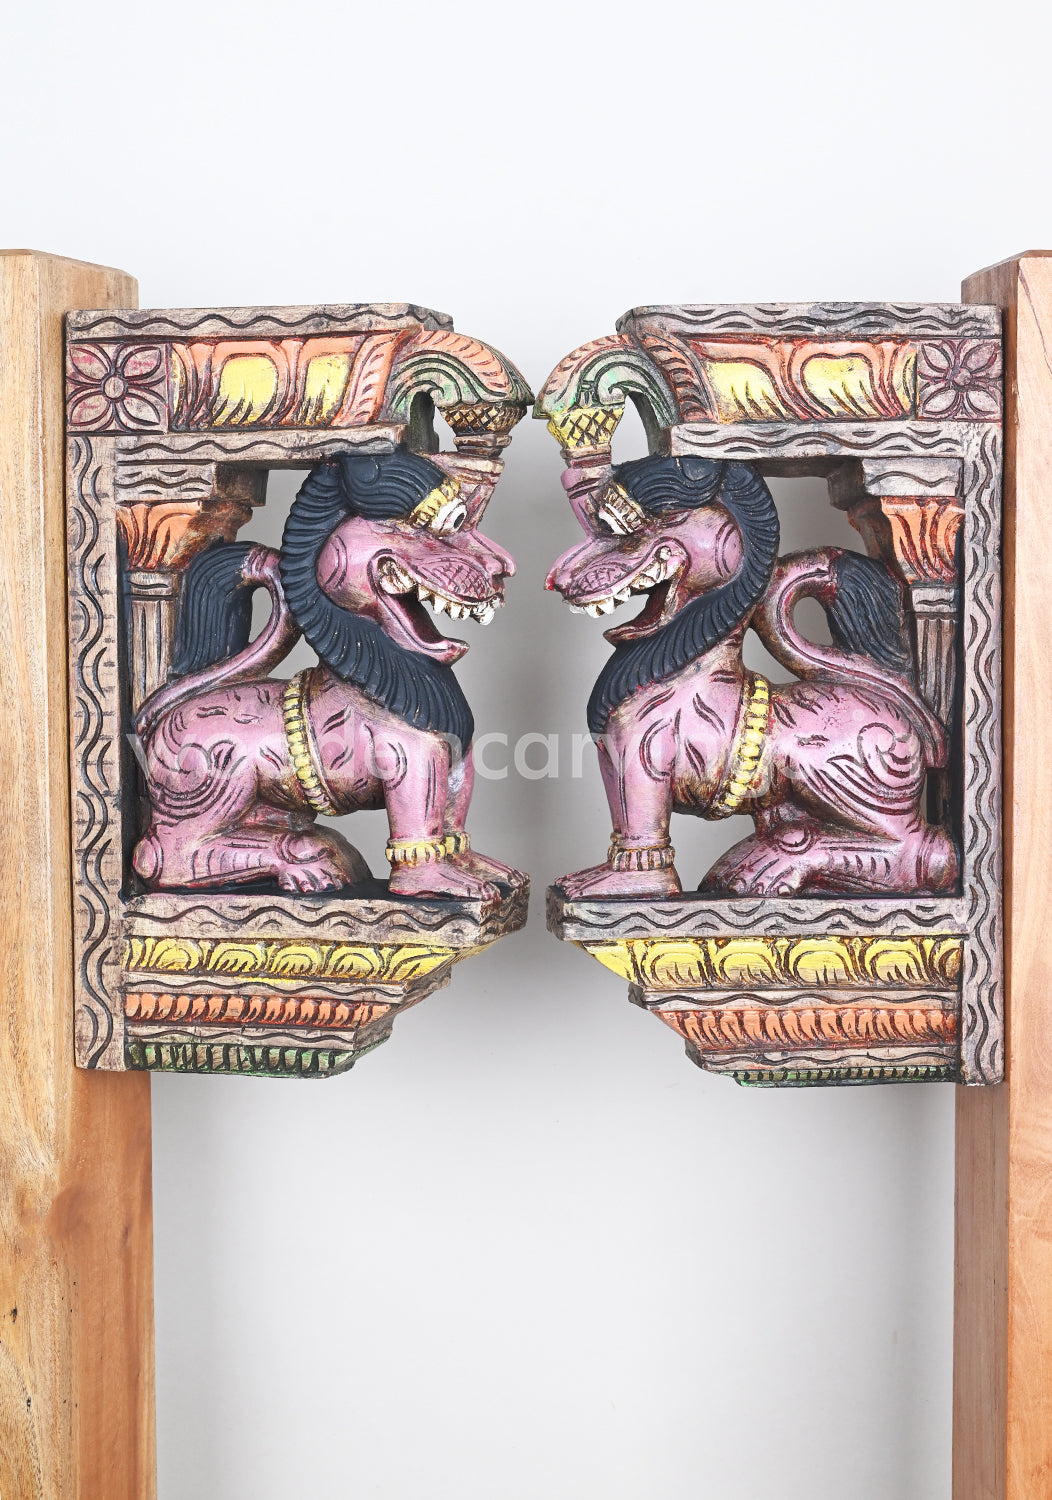 Made by Long lasting Country Wood Vaagai Wooden Yaazhi Coloured Wall Brackets 15"